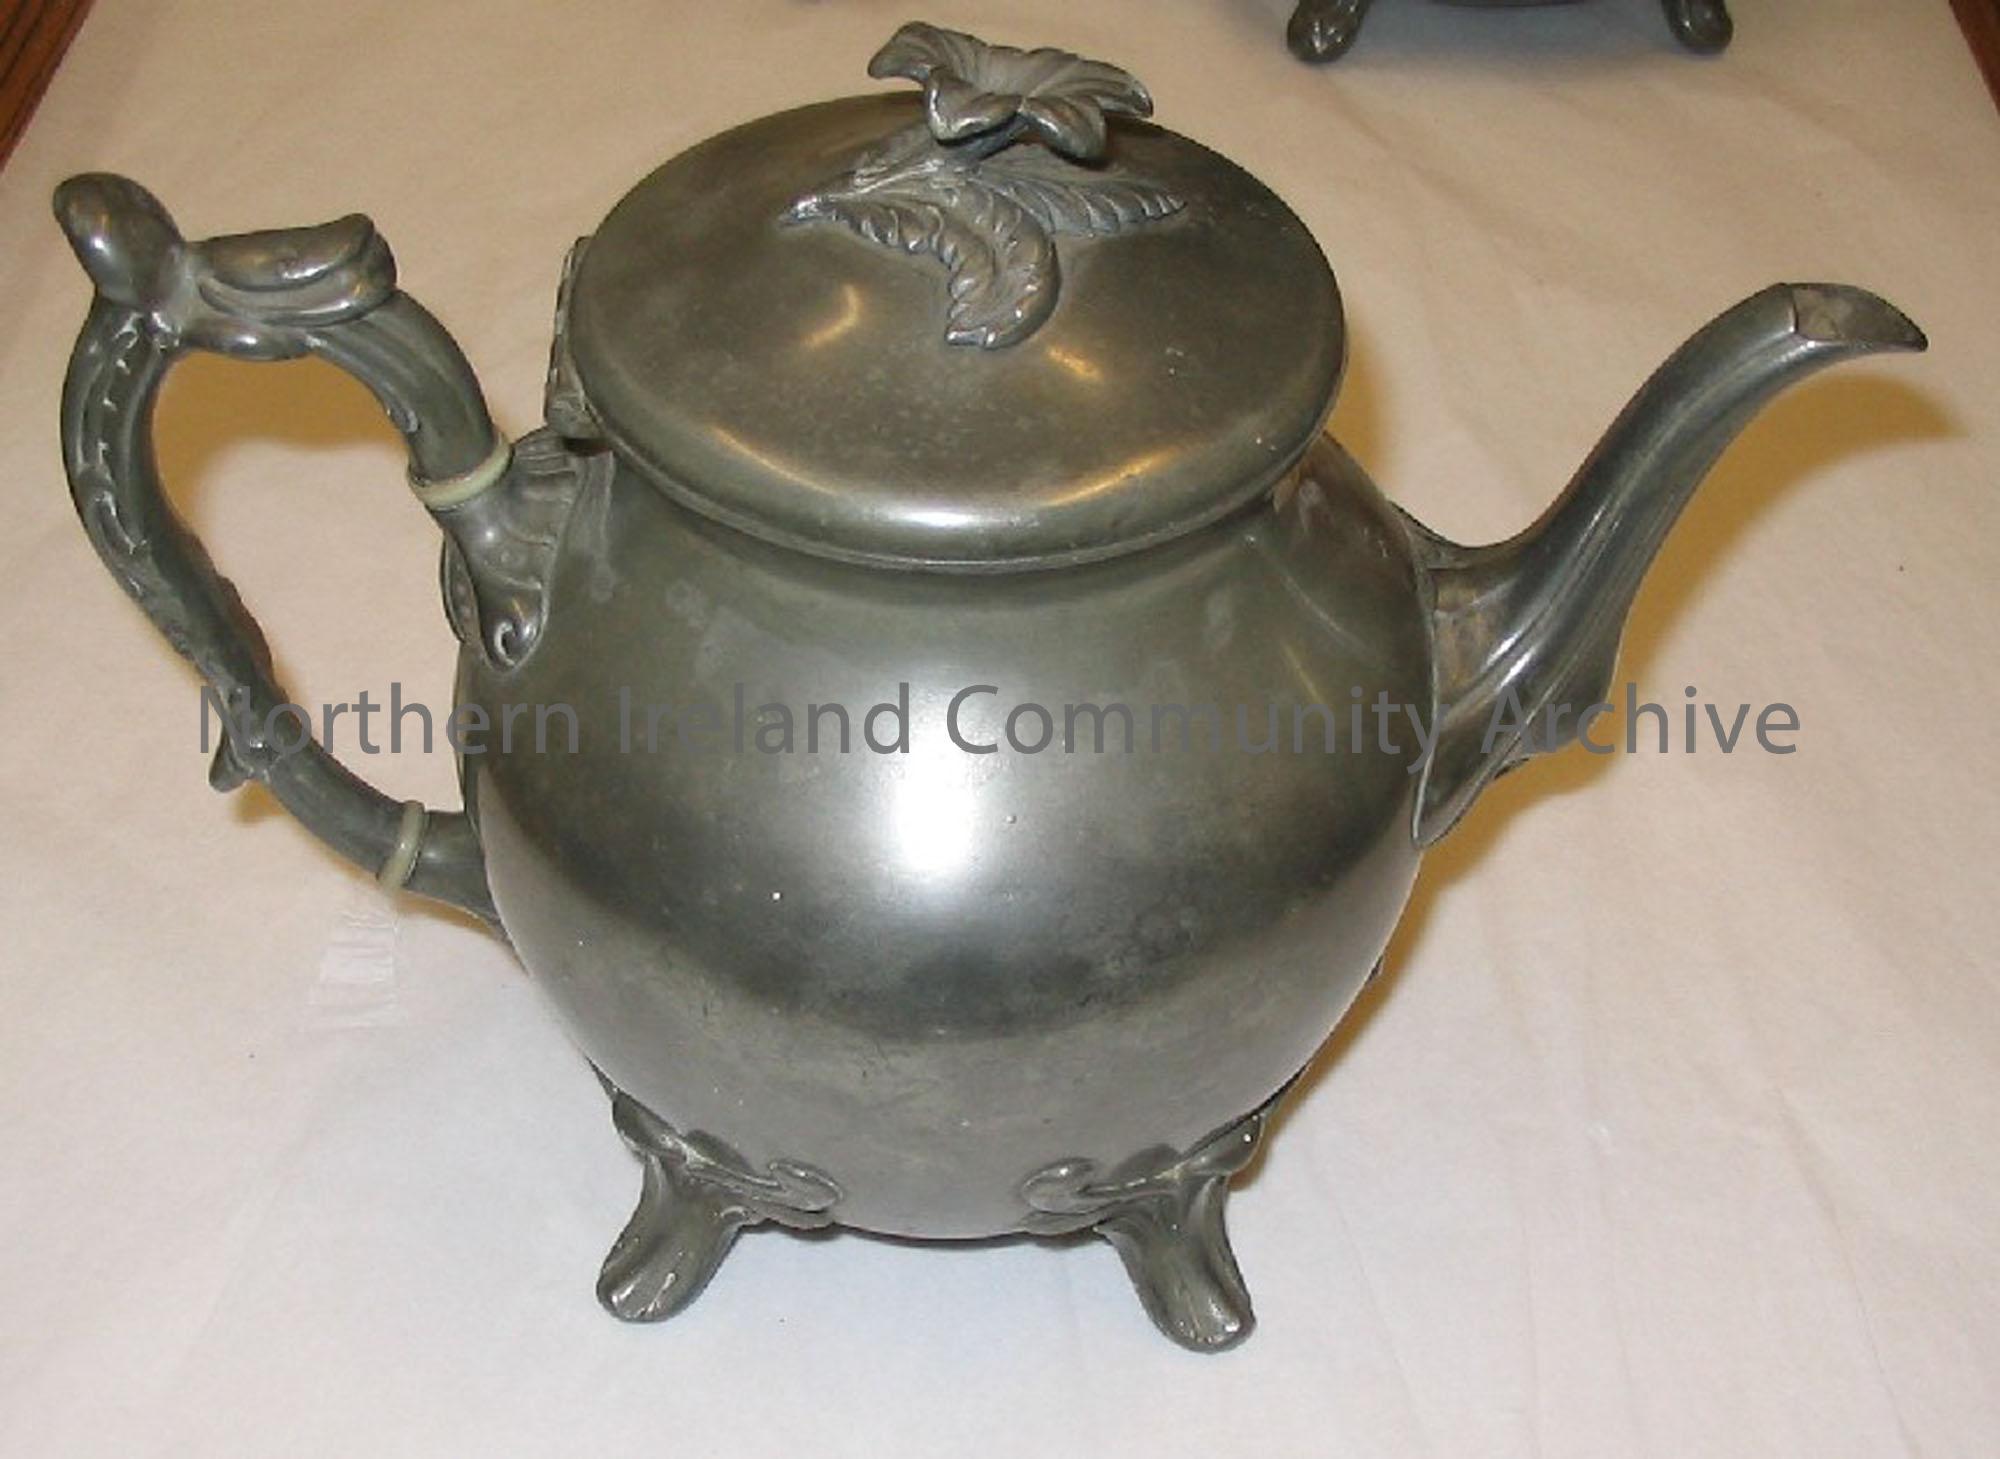 Pear shaped pewter coloured teapot with a plain body and flat lid.